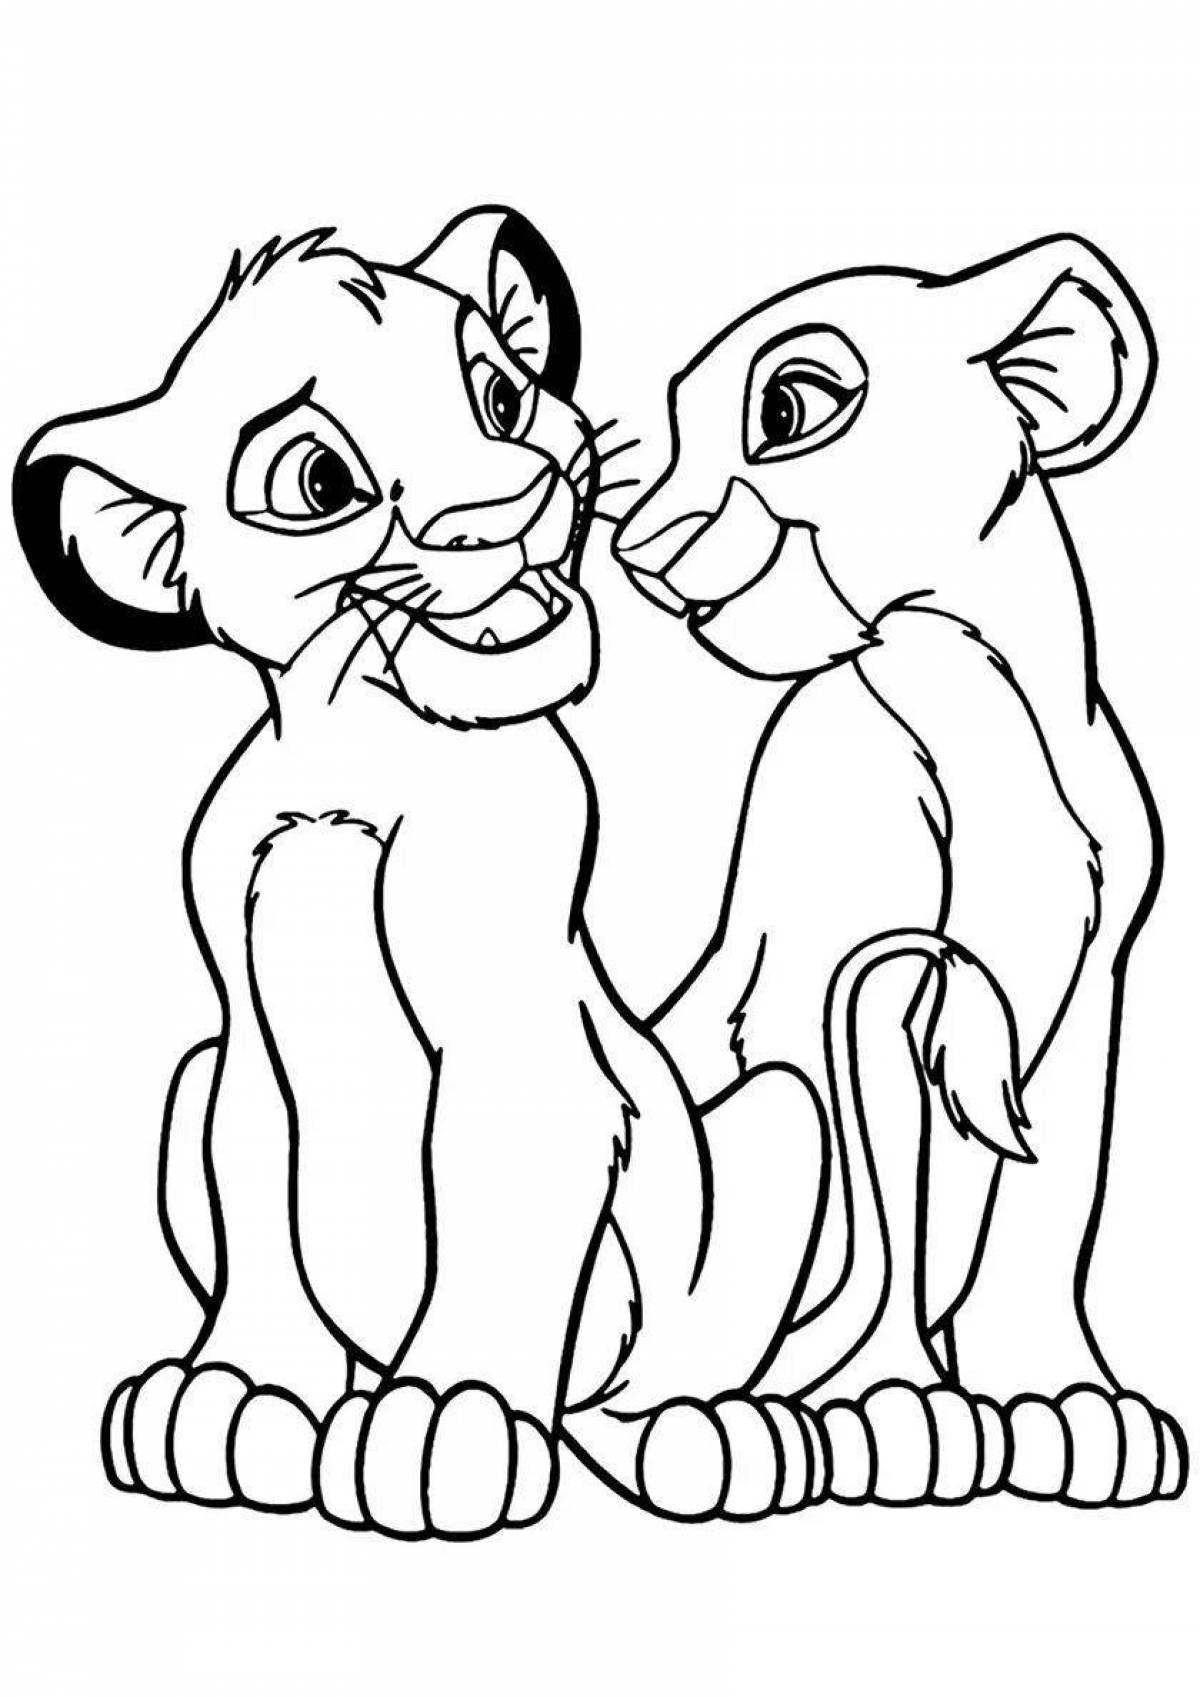 Amazing lion king coloring book for kids